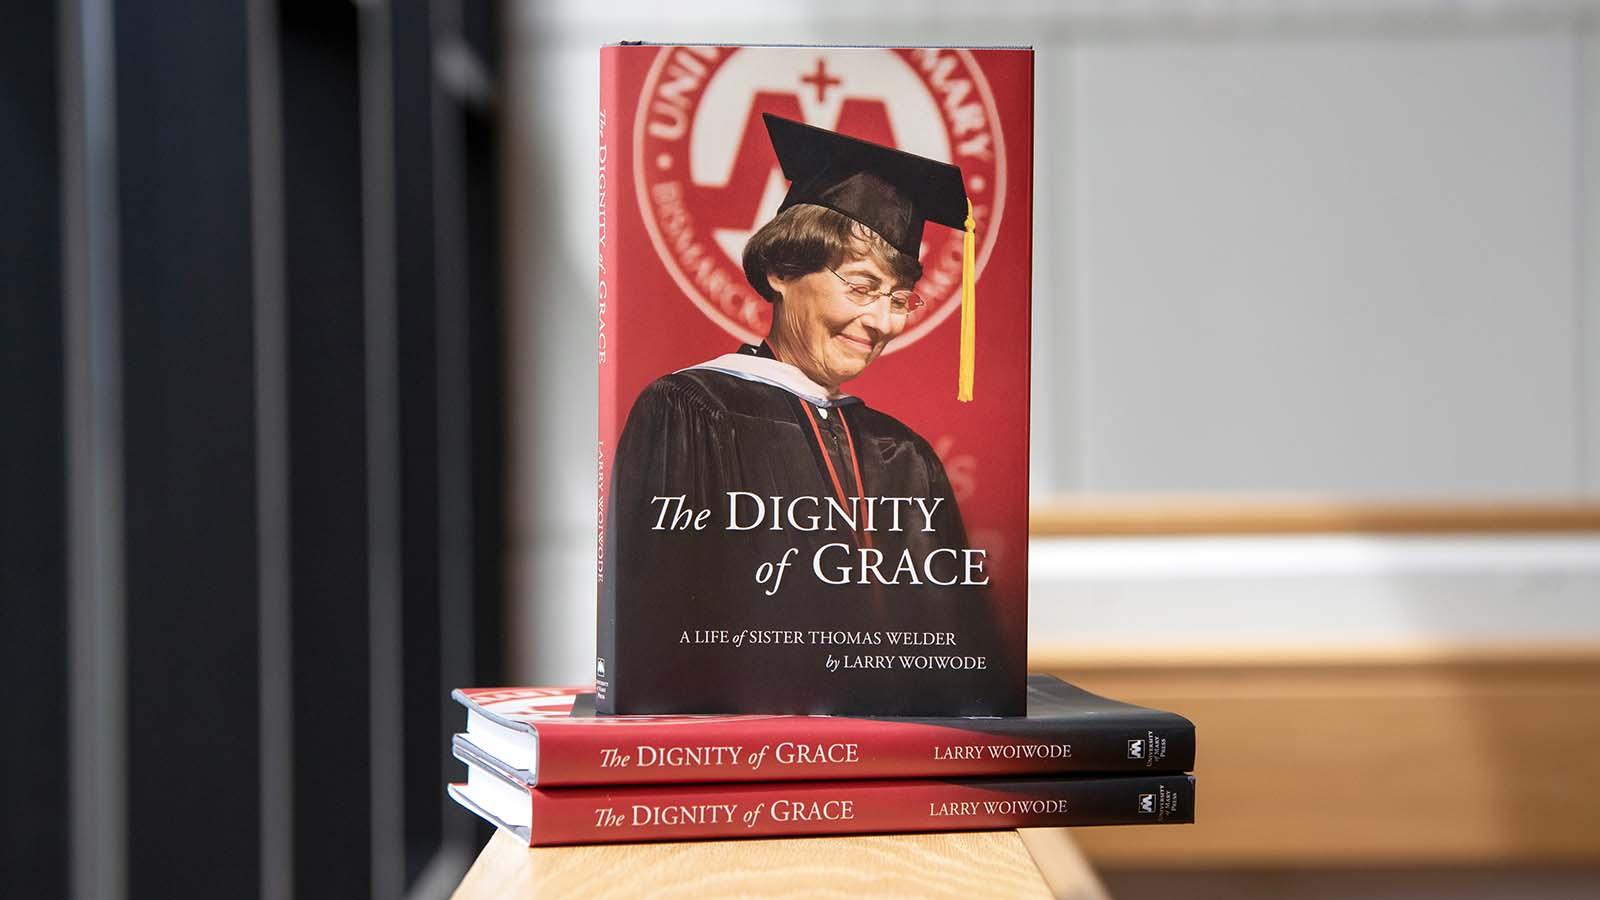 Closeup of stack of Dignity of Grace books on ledge.